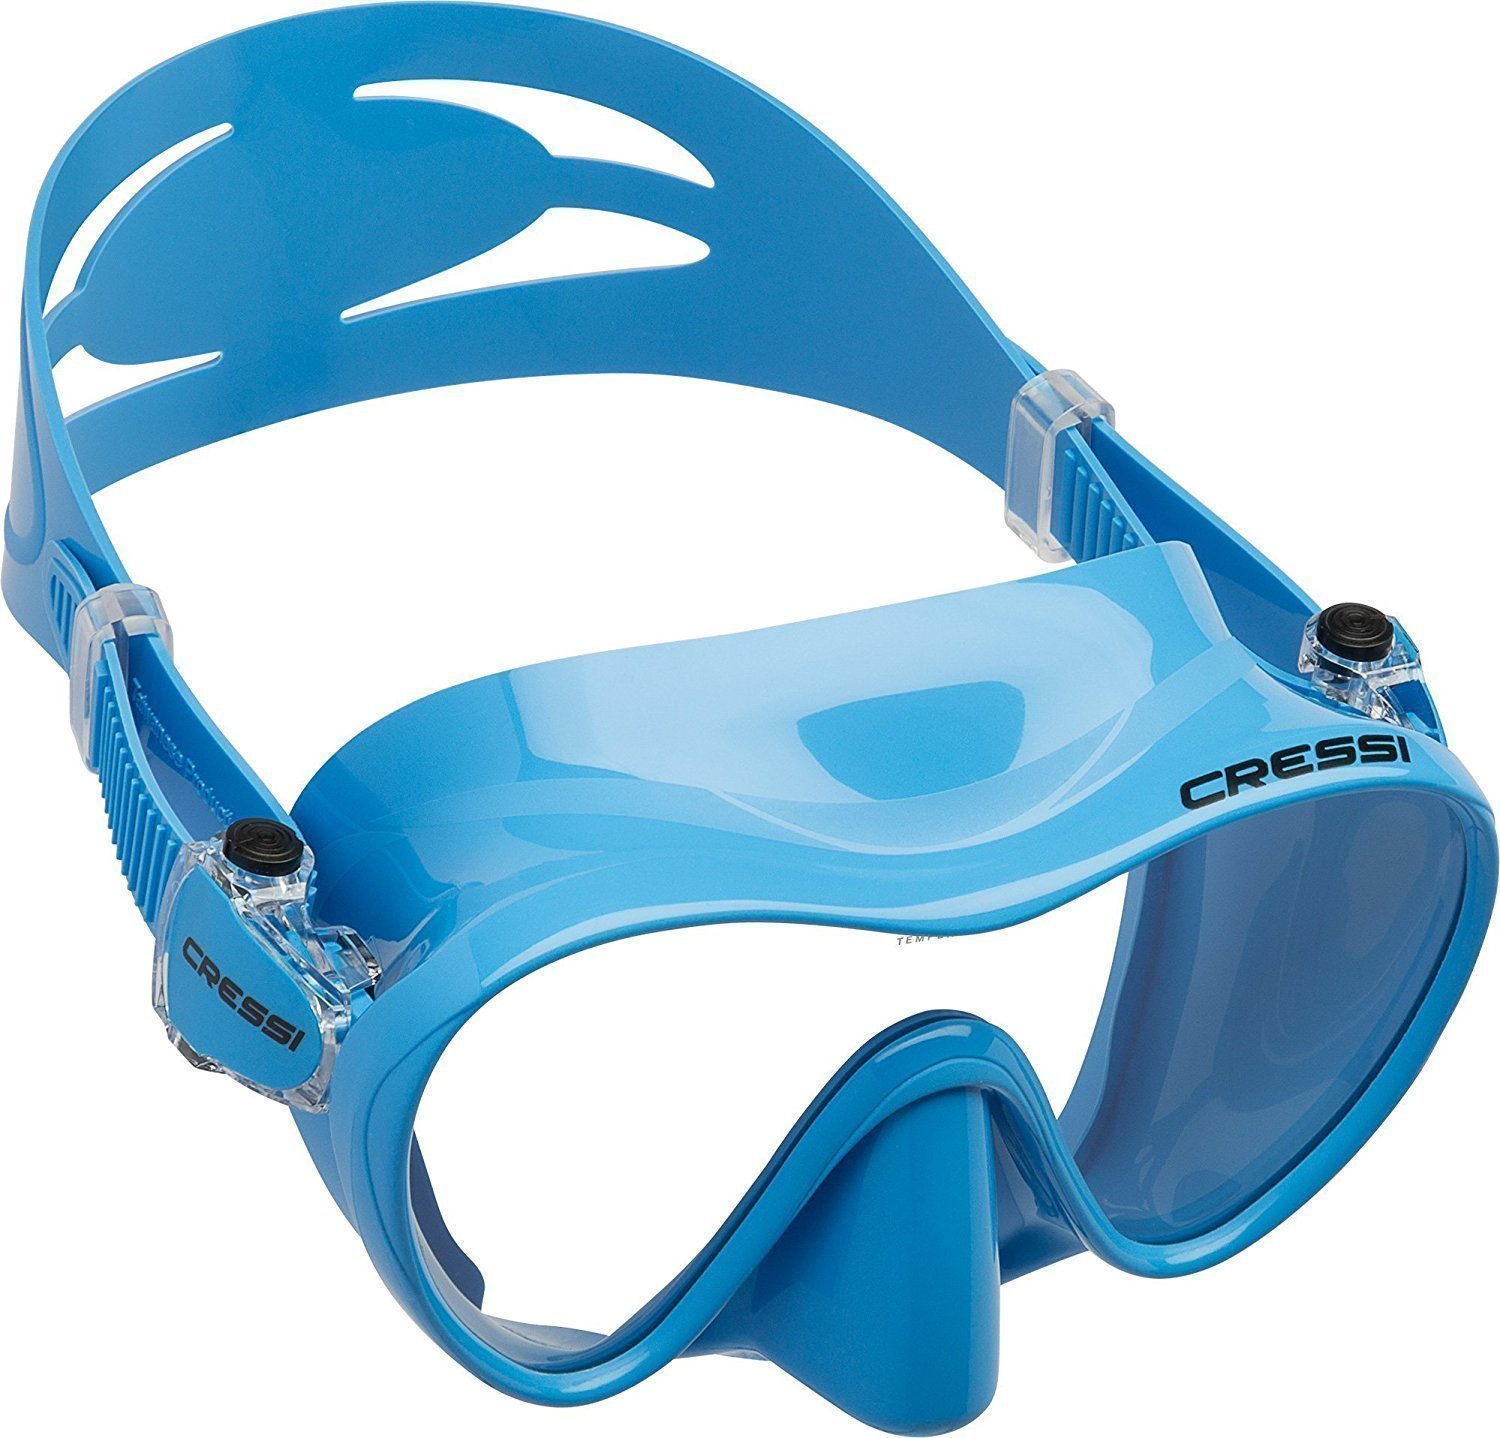 Diving Mask Cressi F1 Small Blue